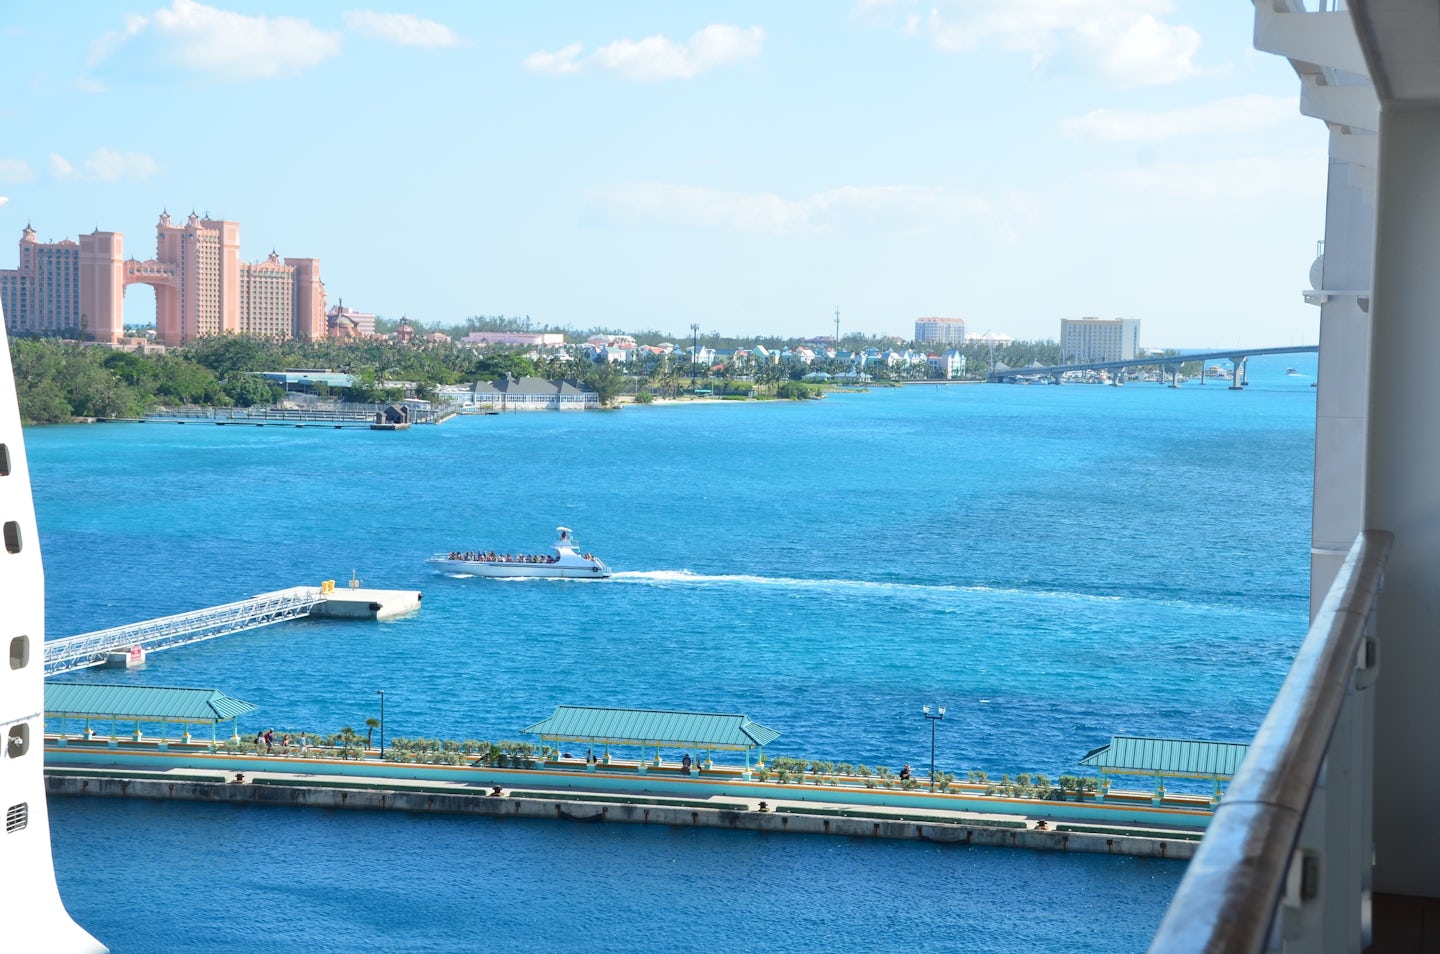 View from the balcony of Atlantis